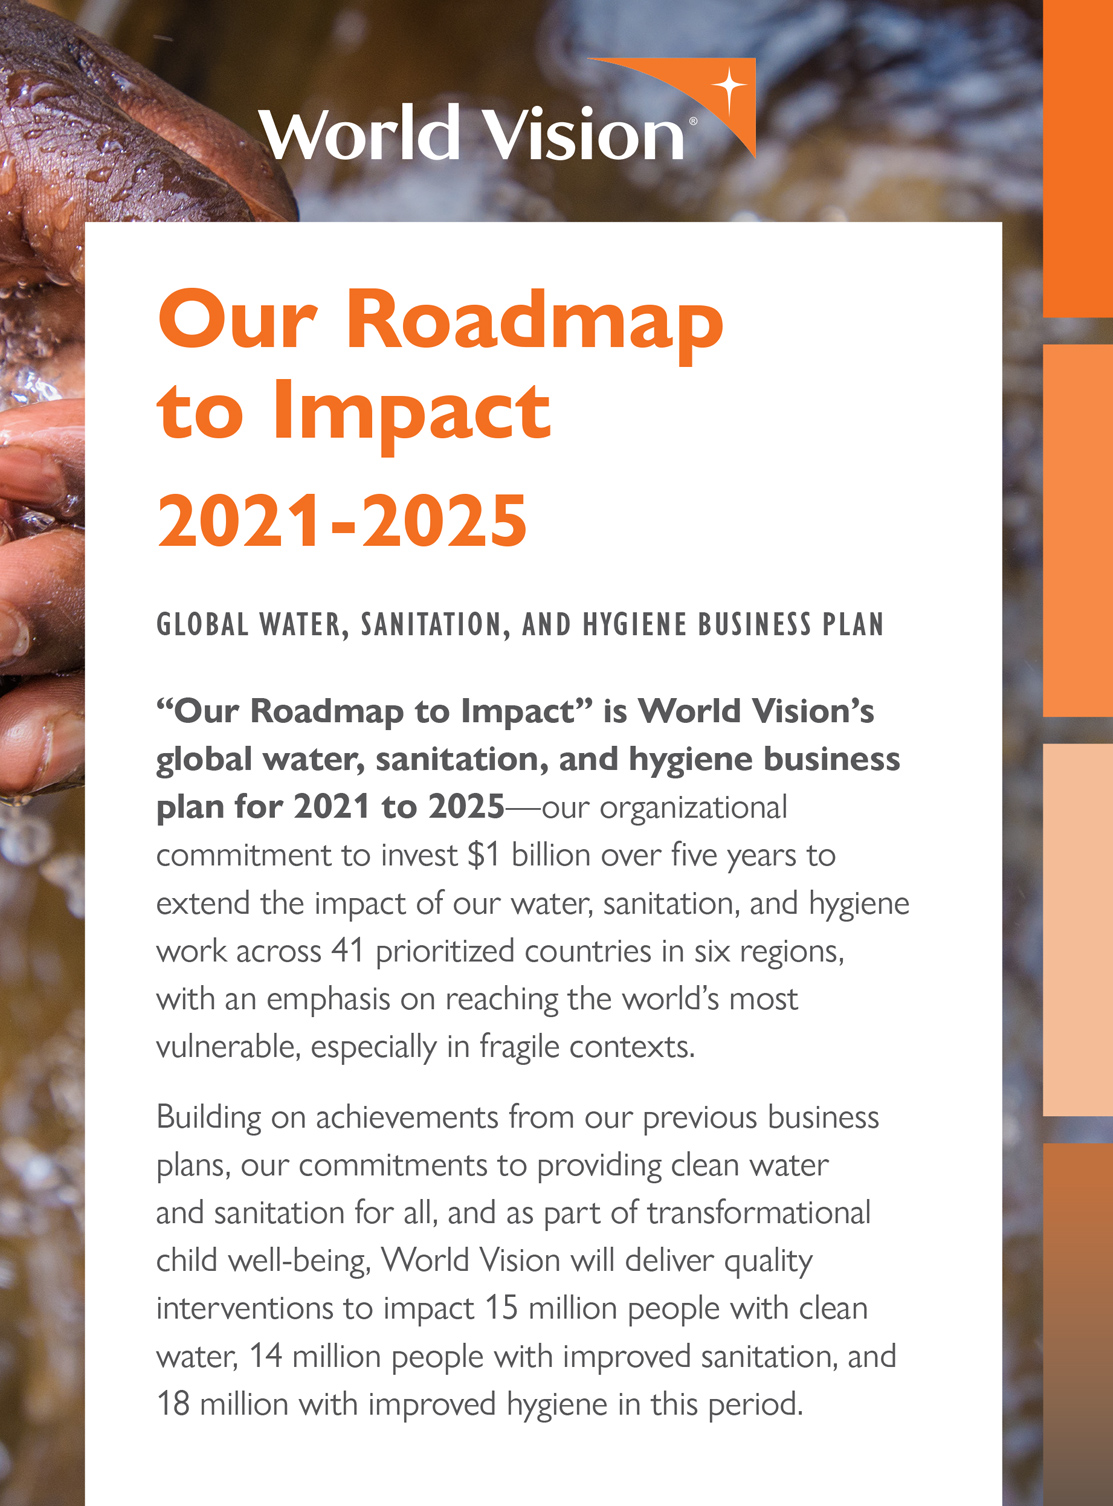 Our Road to Impact